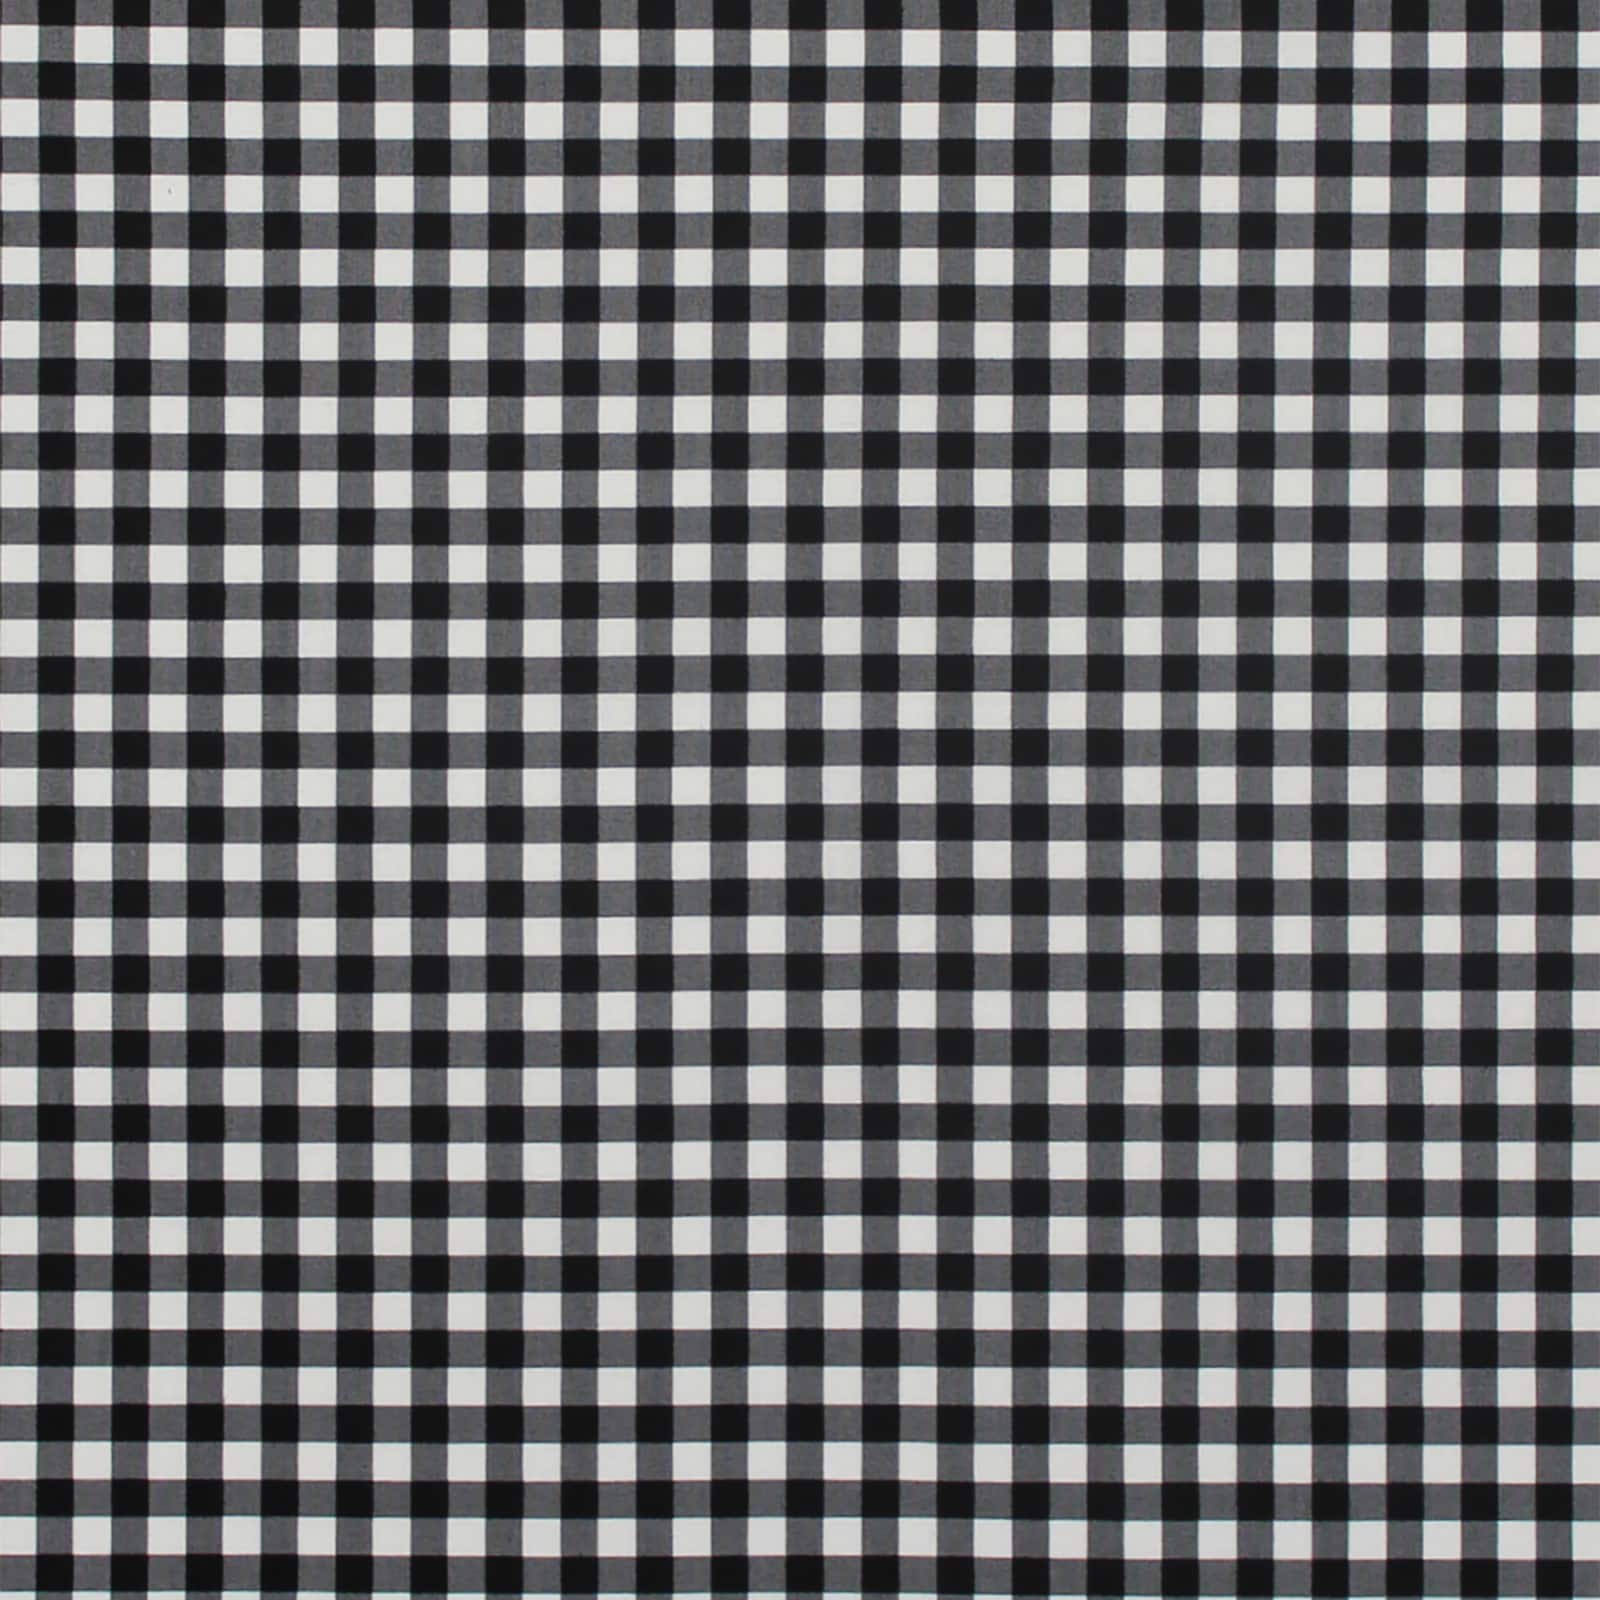 Camelot Fabric Mixology Black Gingham Cotton Home D&#xE9;cor Fabric